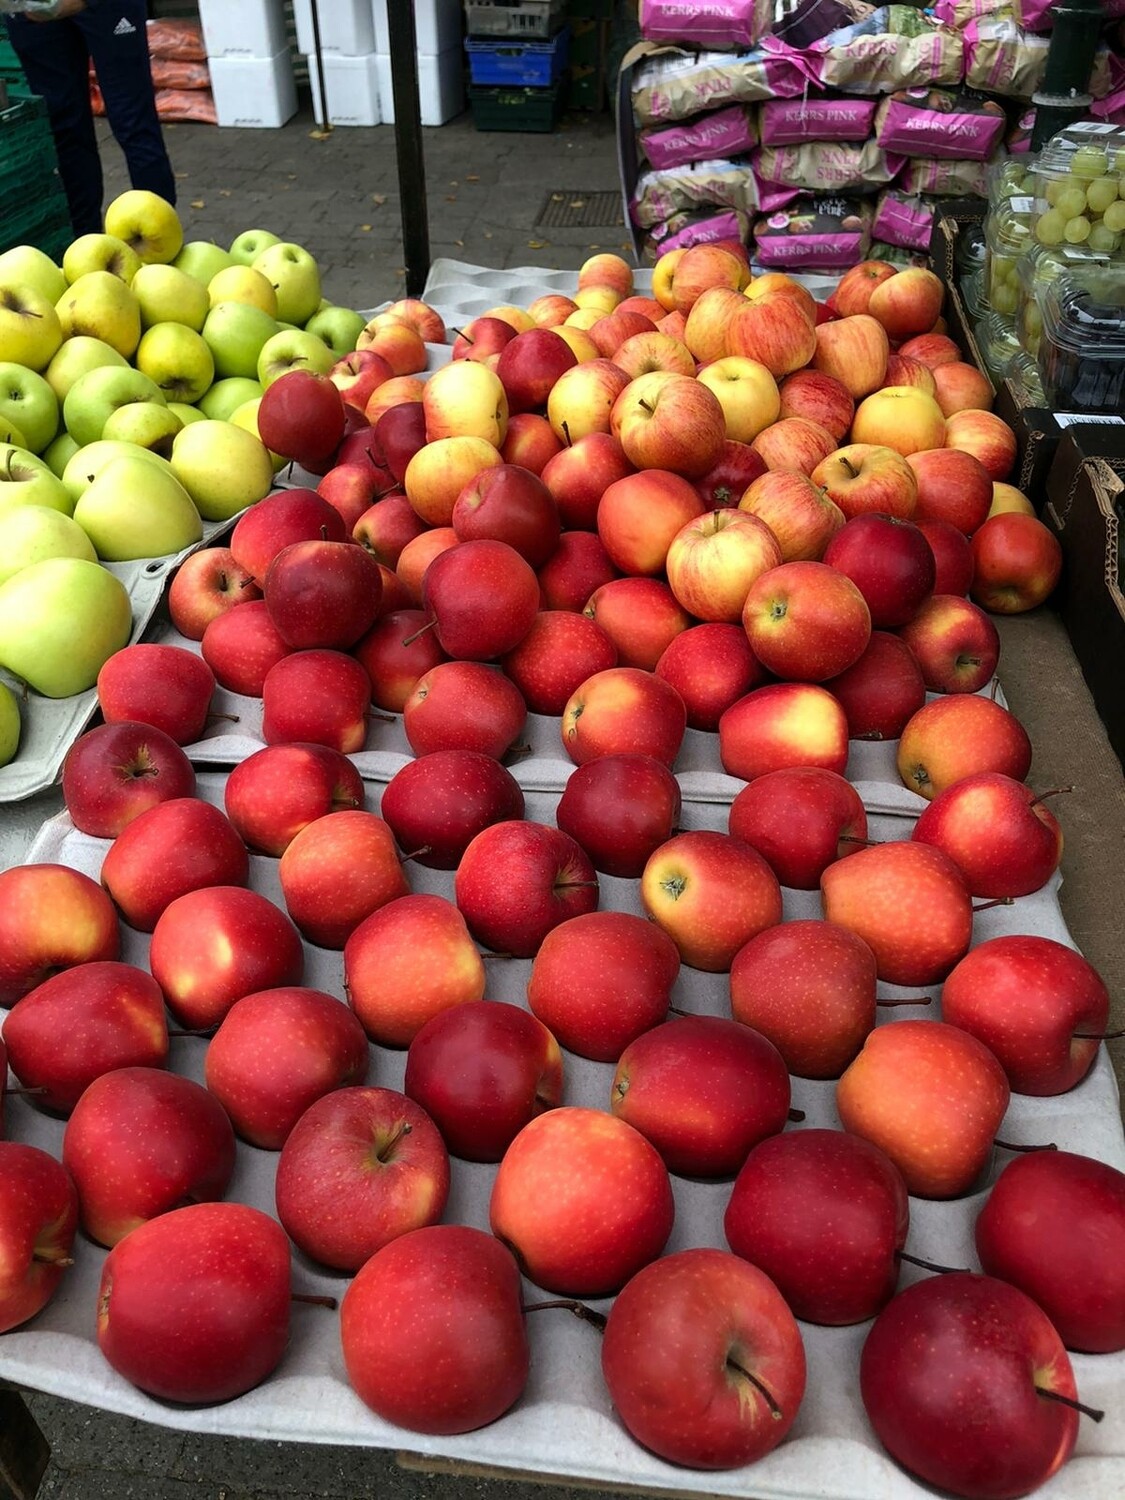 Sm gala apples 10 for €2